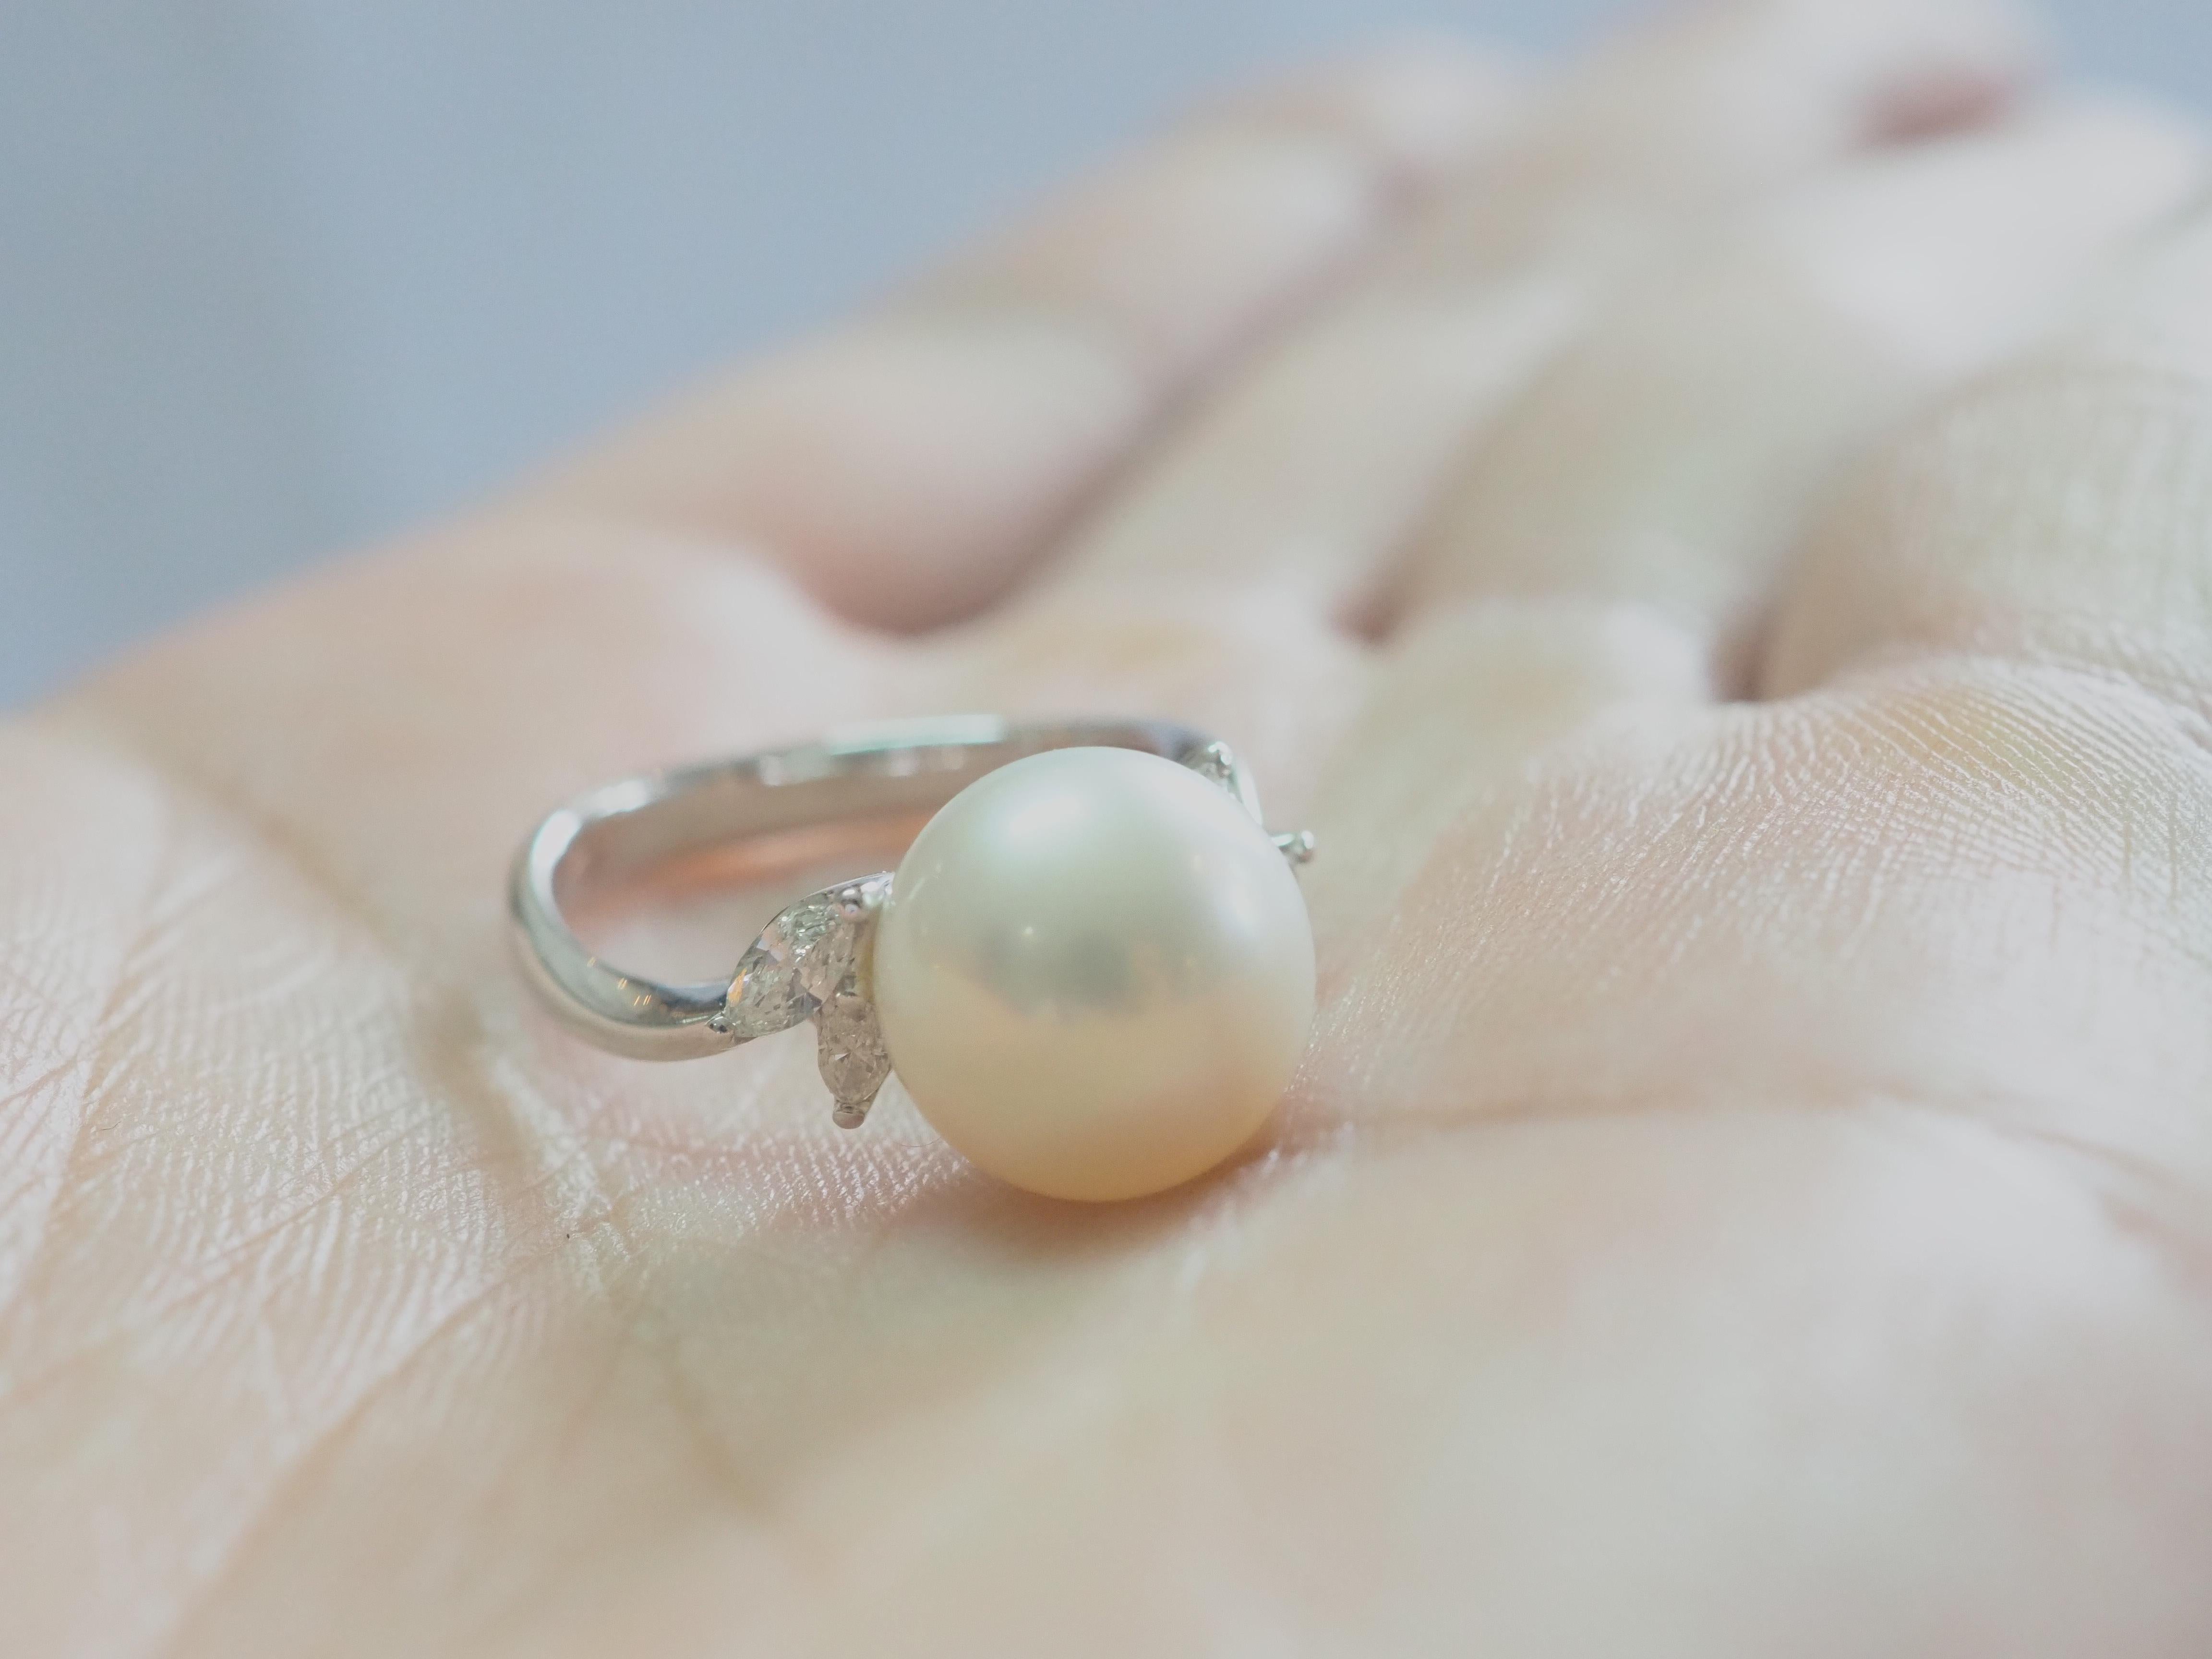 This brilliant 18k gold ring is adorned with a rare and beautiful South Sea pearl! The pearl is perfectly round and has little to no visible blemishes. The diameter of the pearl is 11mm. The accented marquise diamonds are clean and of high quality